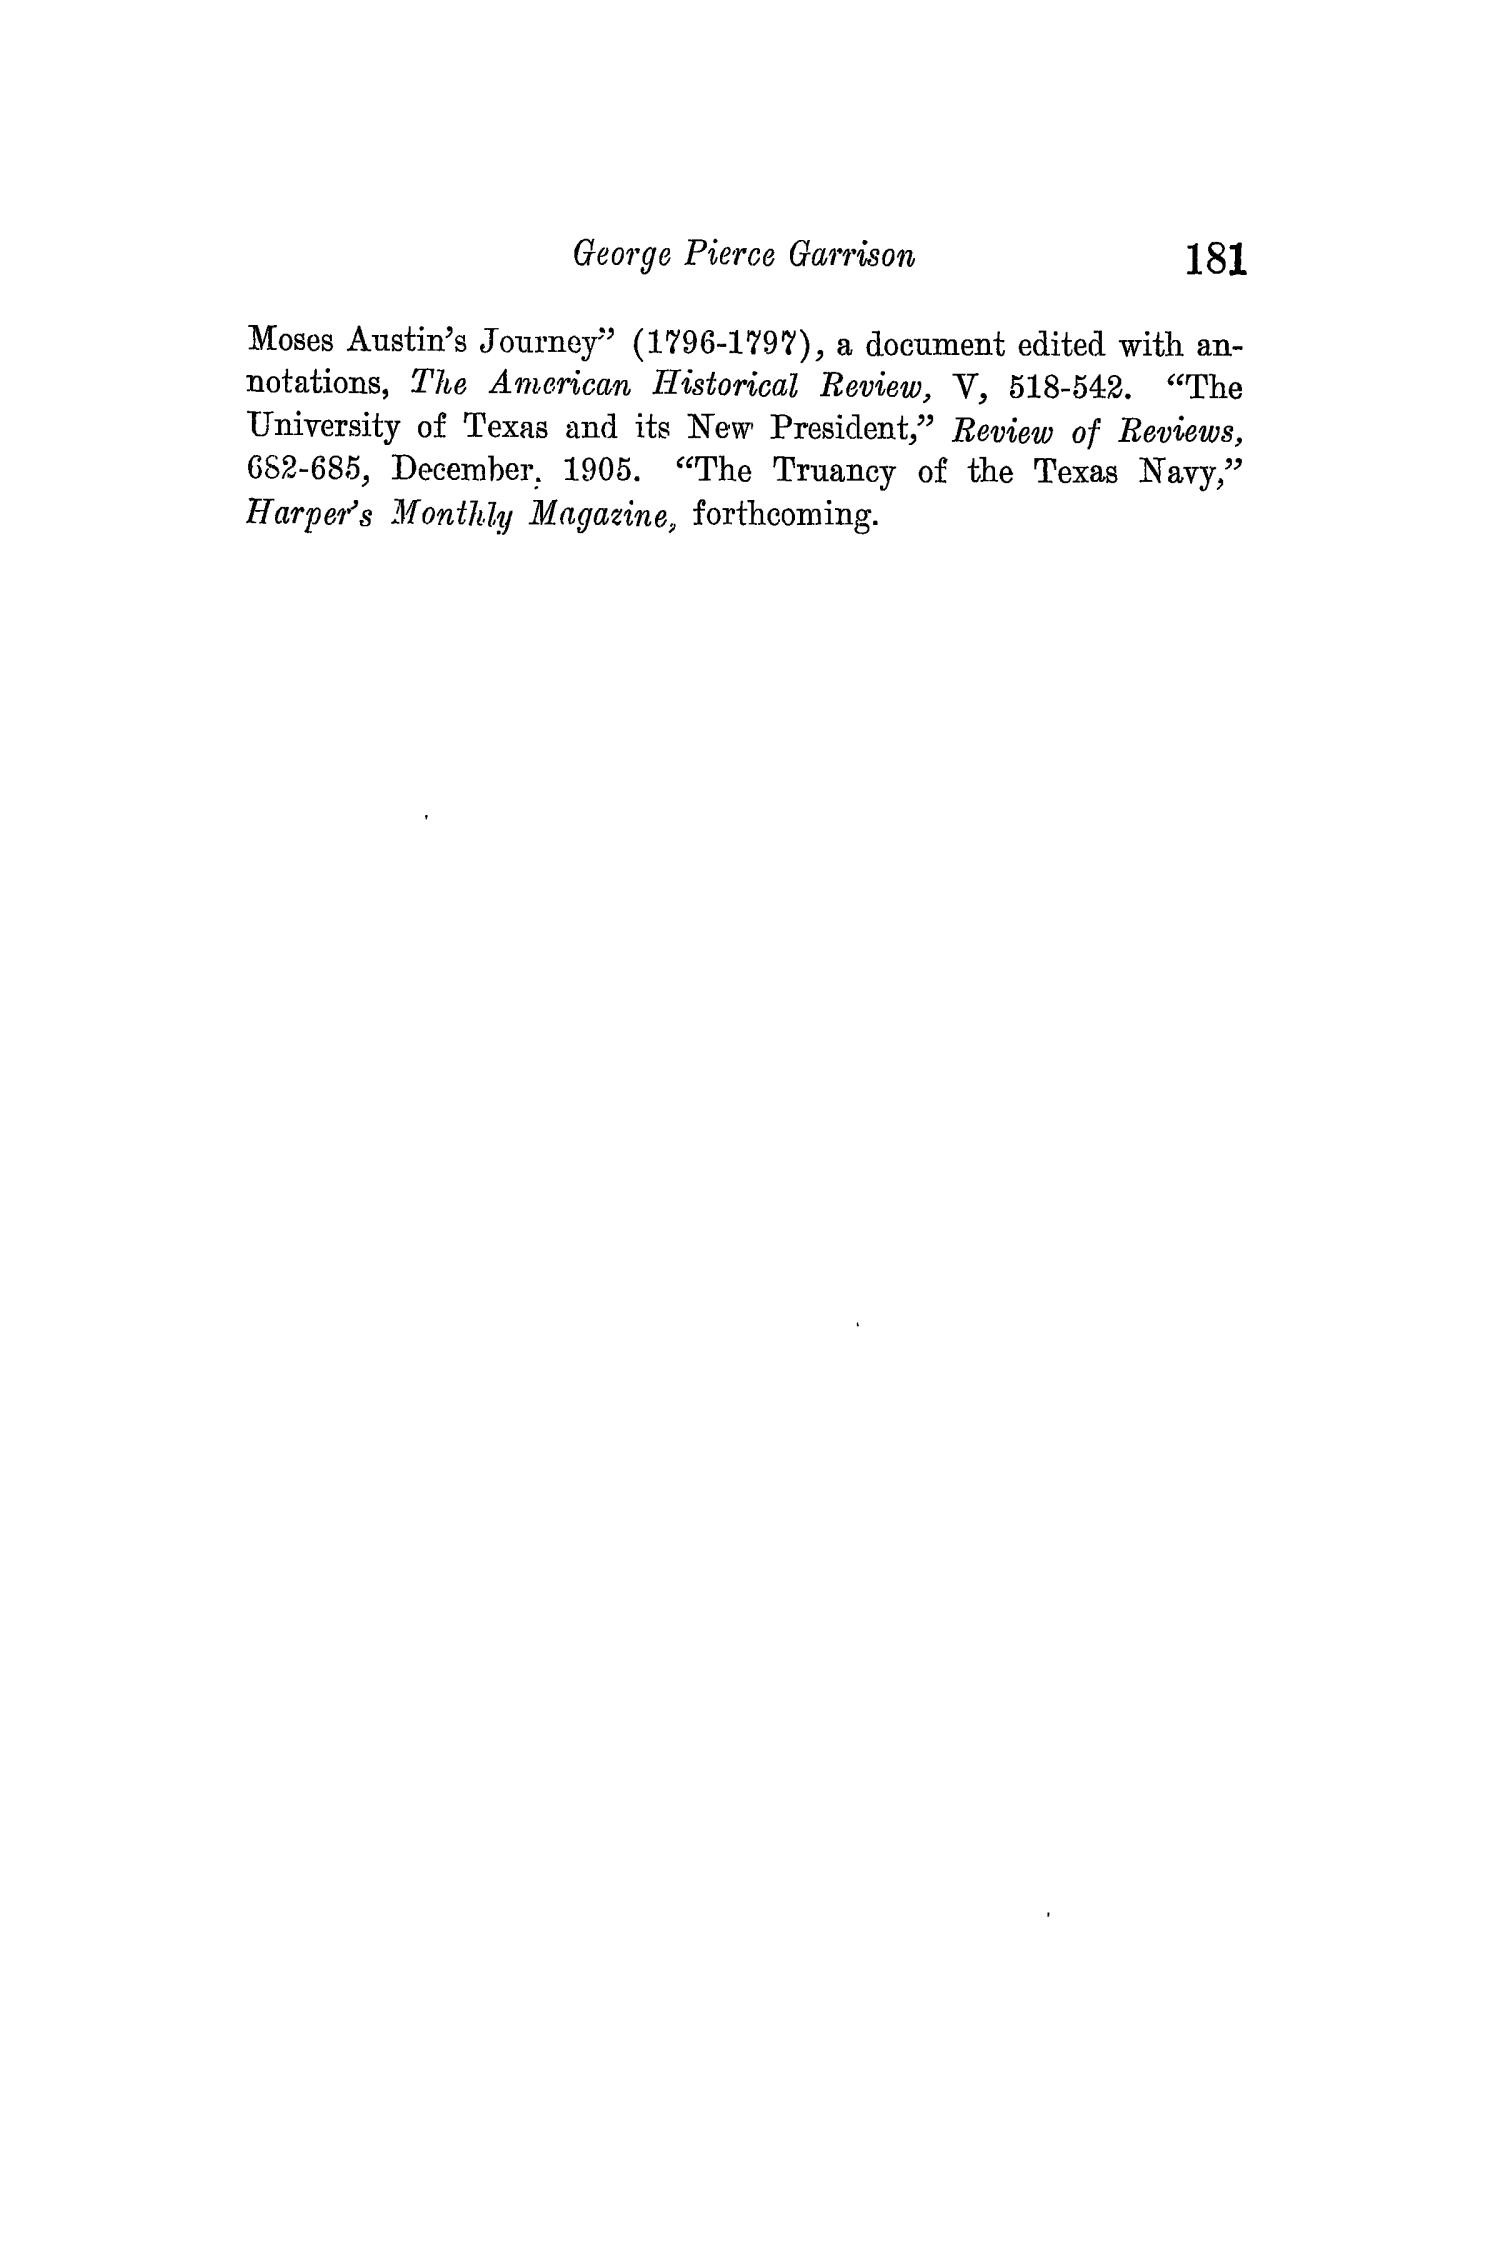 The Quarterly of the Texas State Historical Association, Volume 14, July 1910 - April, 1911
                                                
                                                    181
                                                